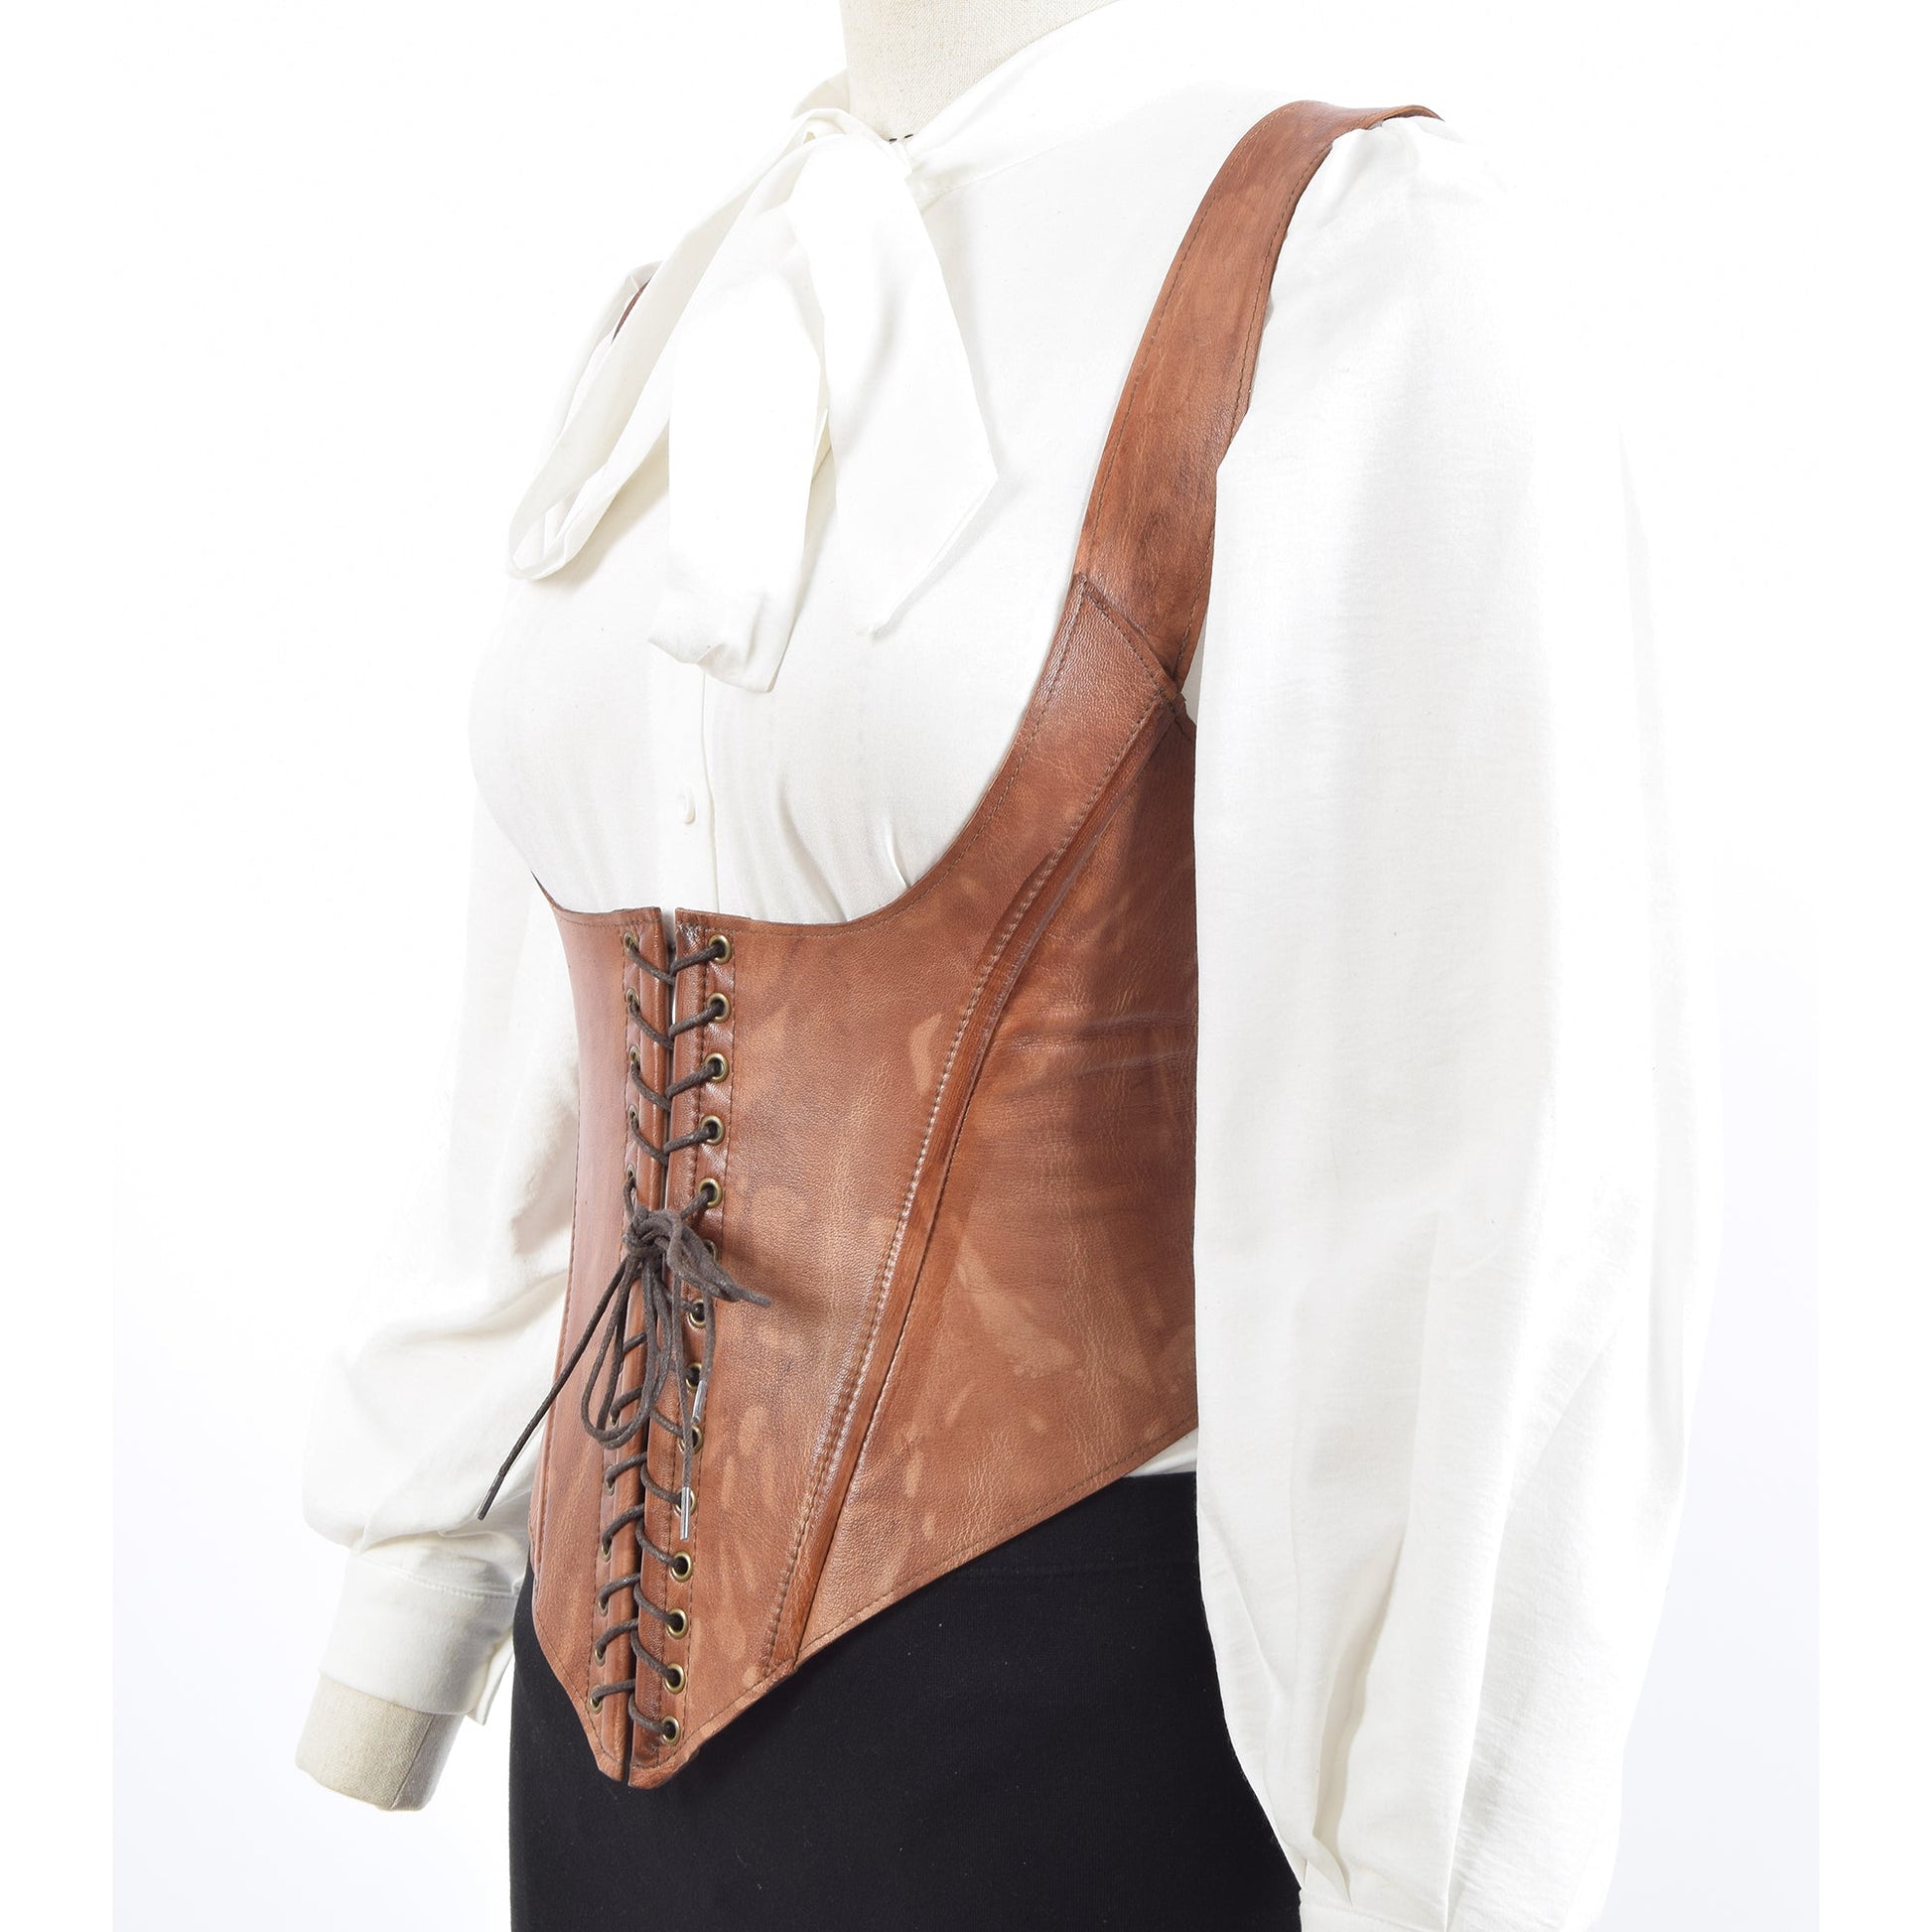 Lady Leather Corset Light Brown - Zengoda Shop online from Artisan Brands